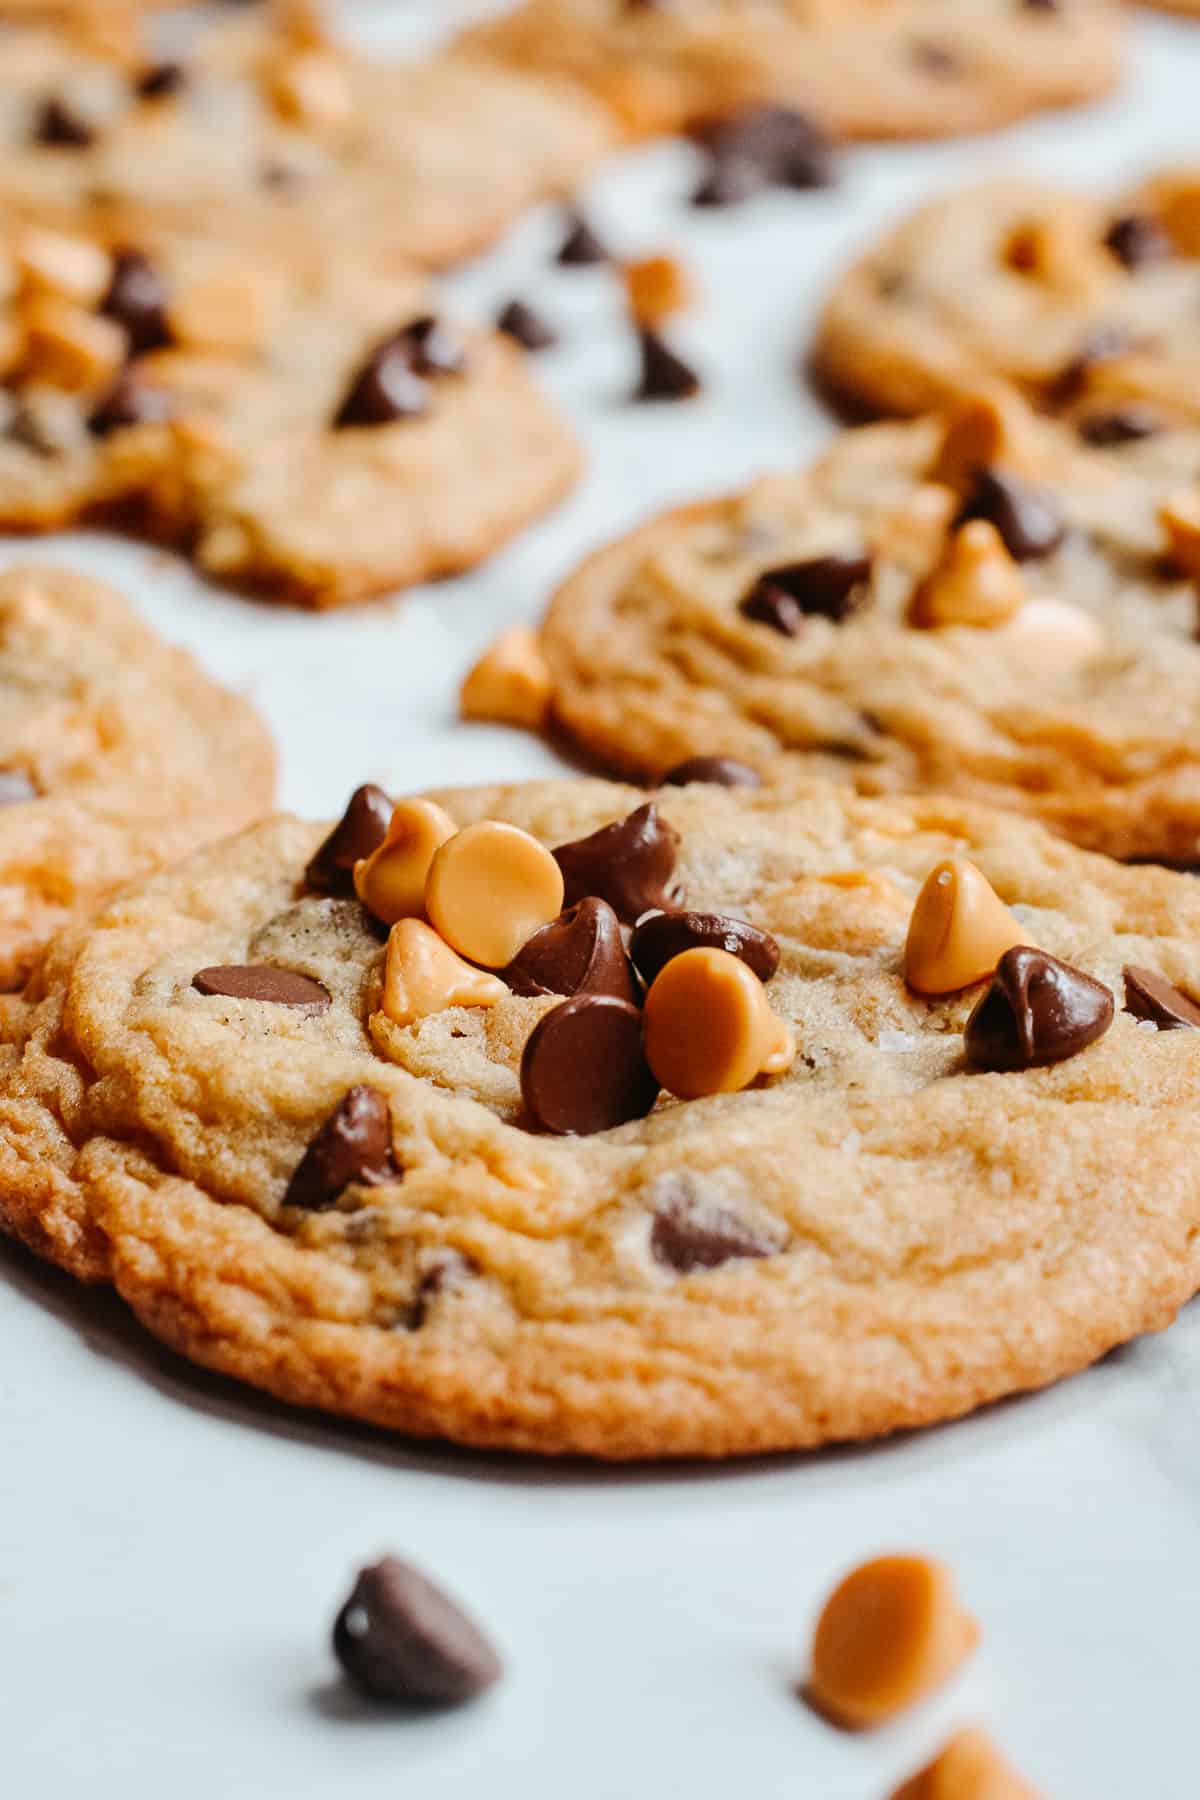 Butterscotch and chocolate chips on top of a cookie, with more cookies behind.